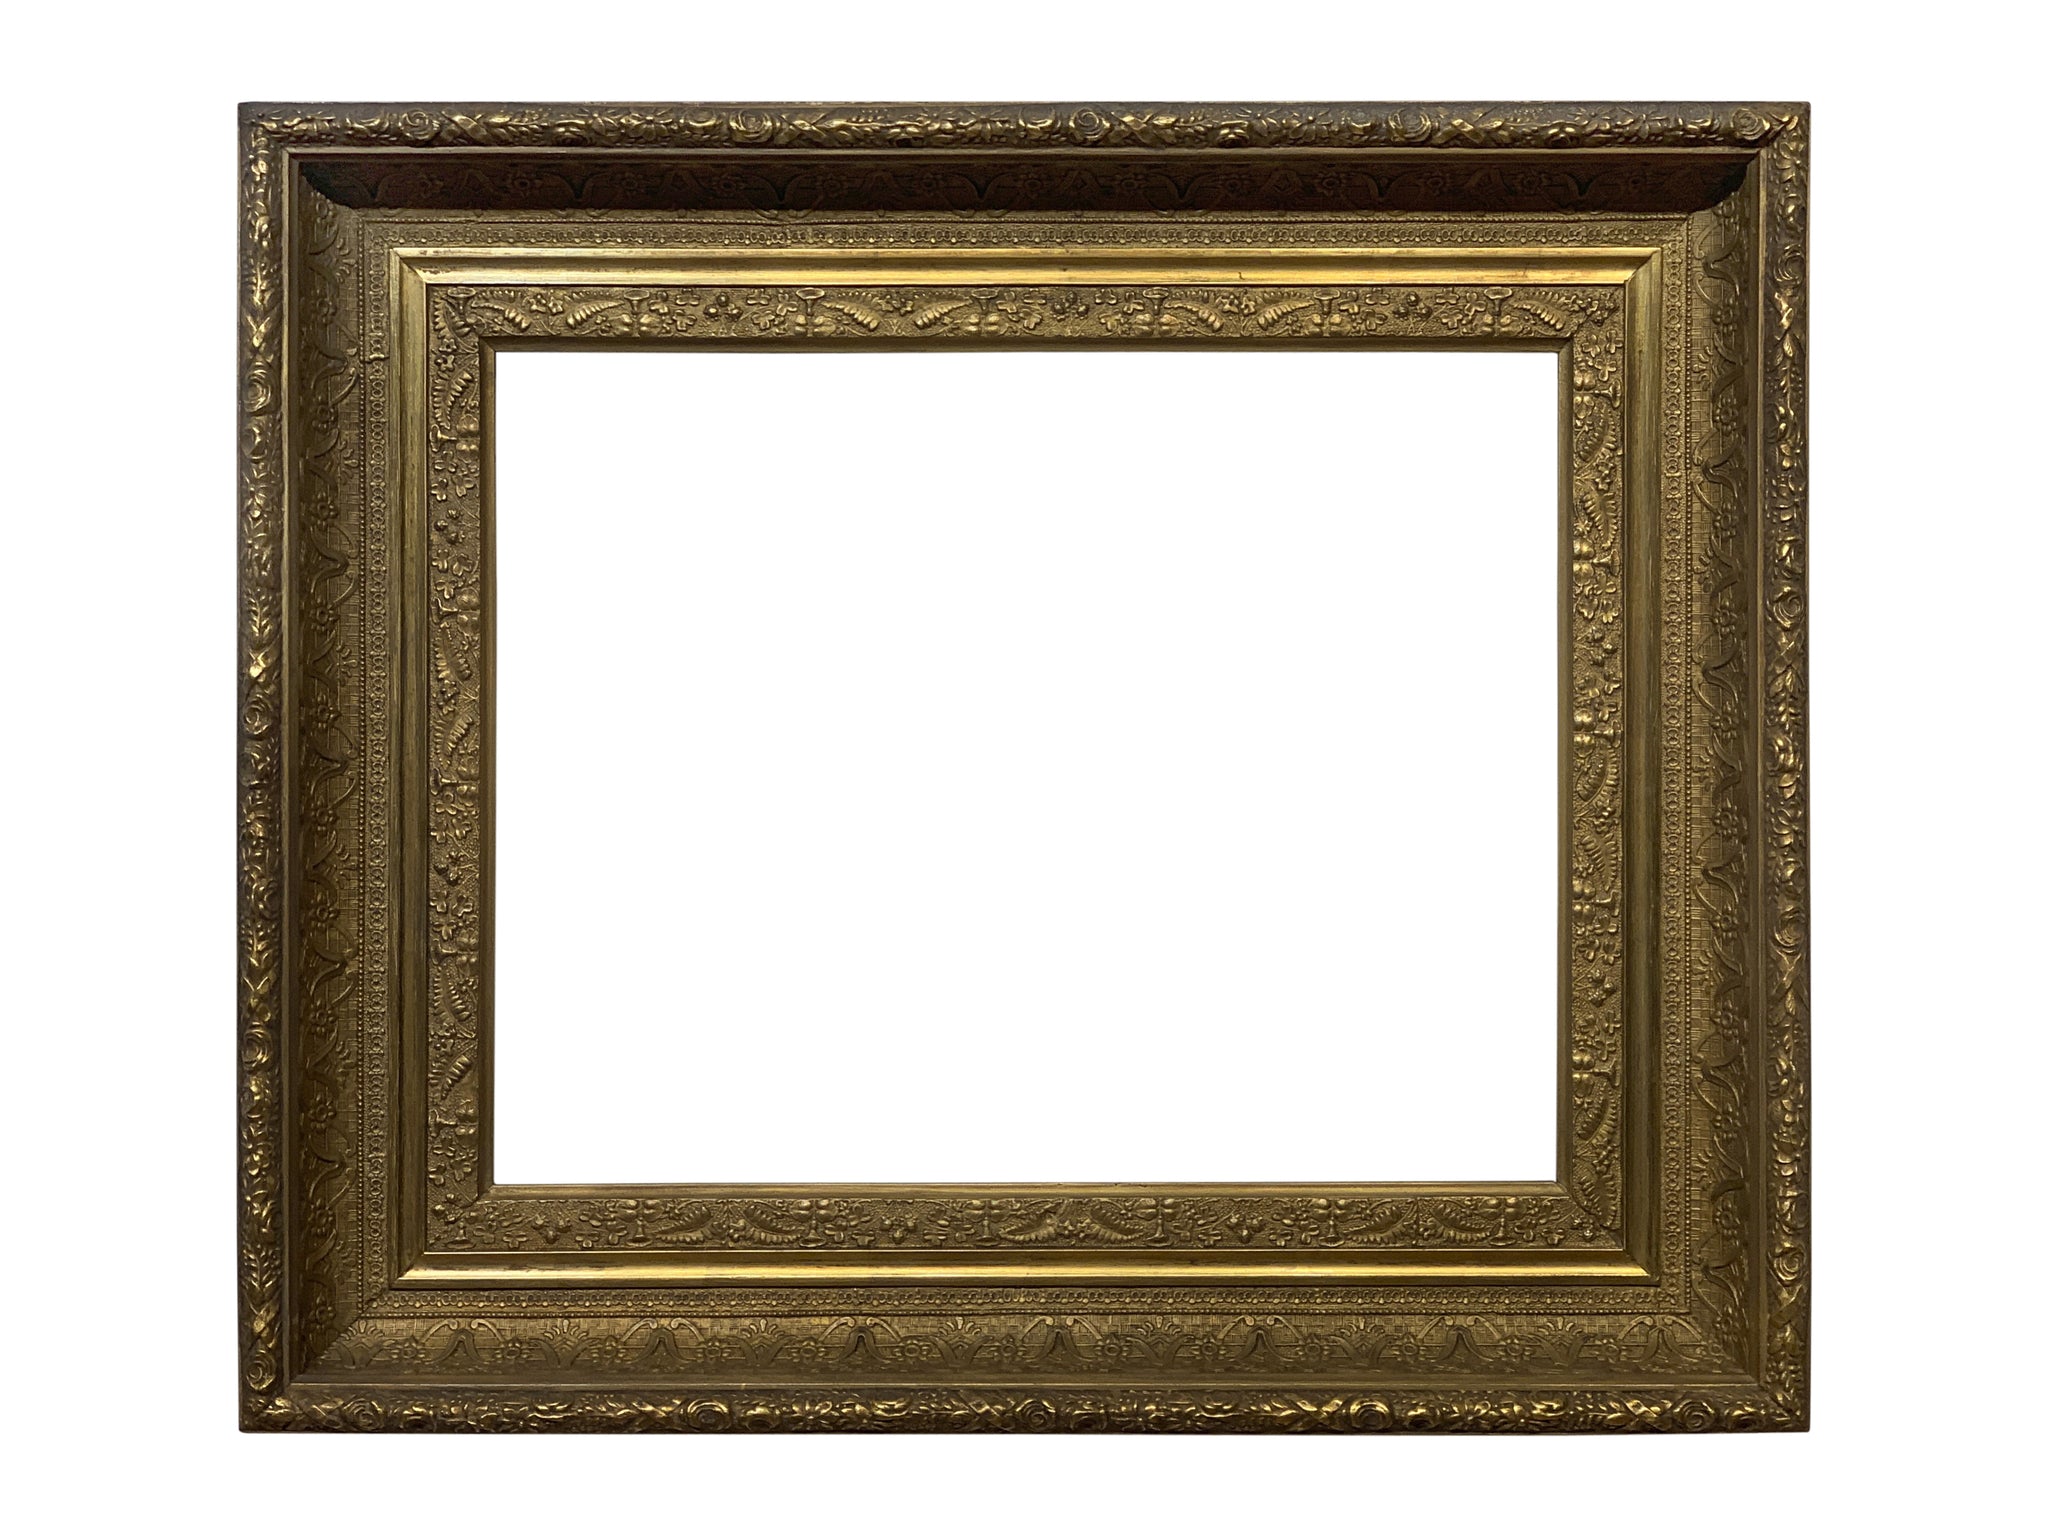 Imperial Frames 6141620 16 by 20-Inch/20 by 16-Inch Picture/Photo Frame,  Dark Gold with Floral Design and a Canvas Liner